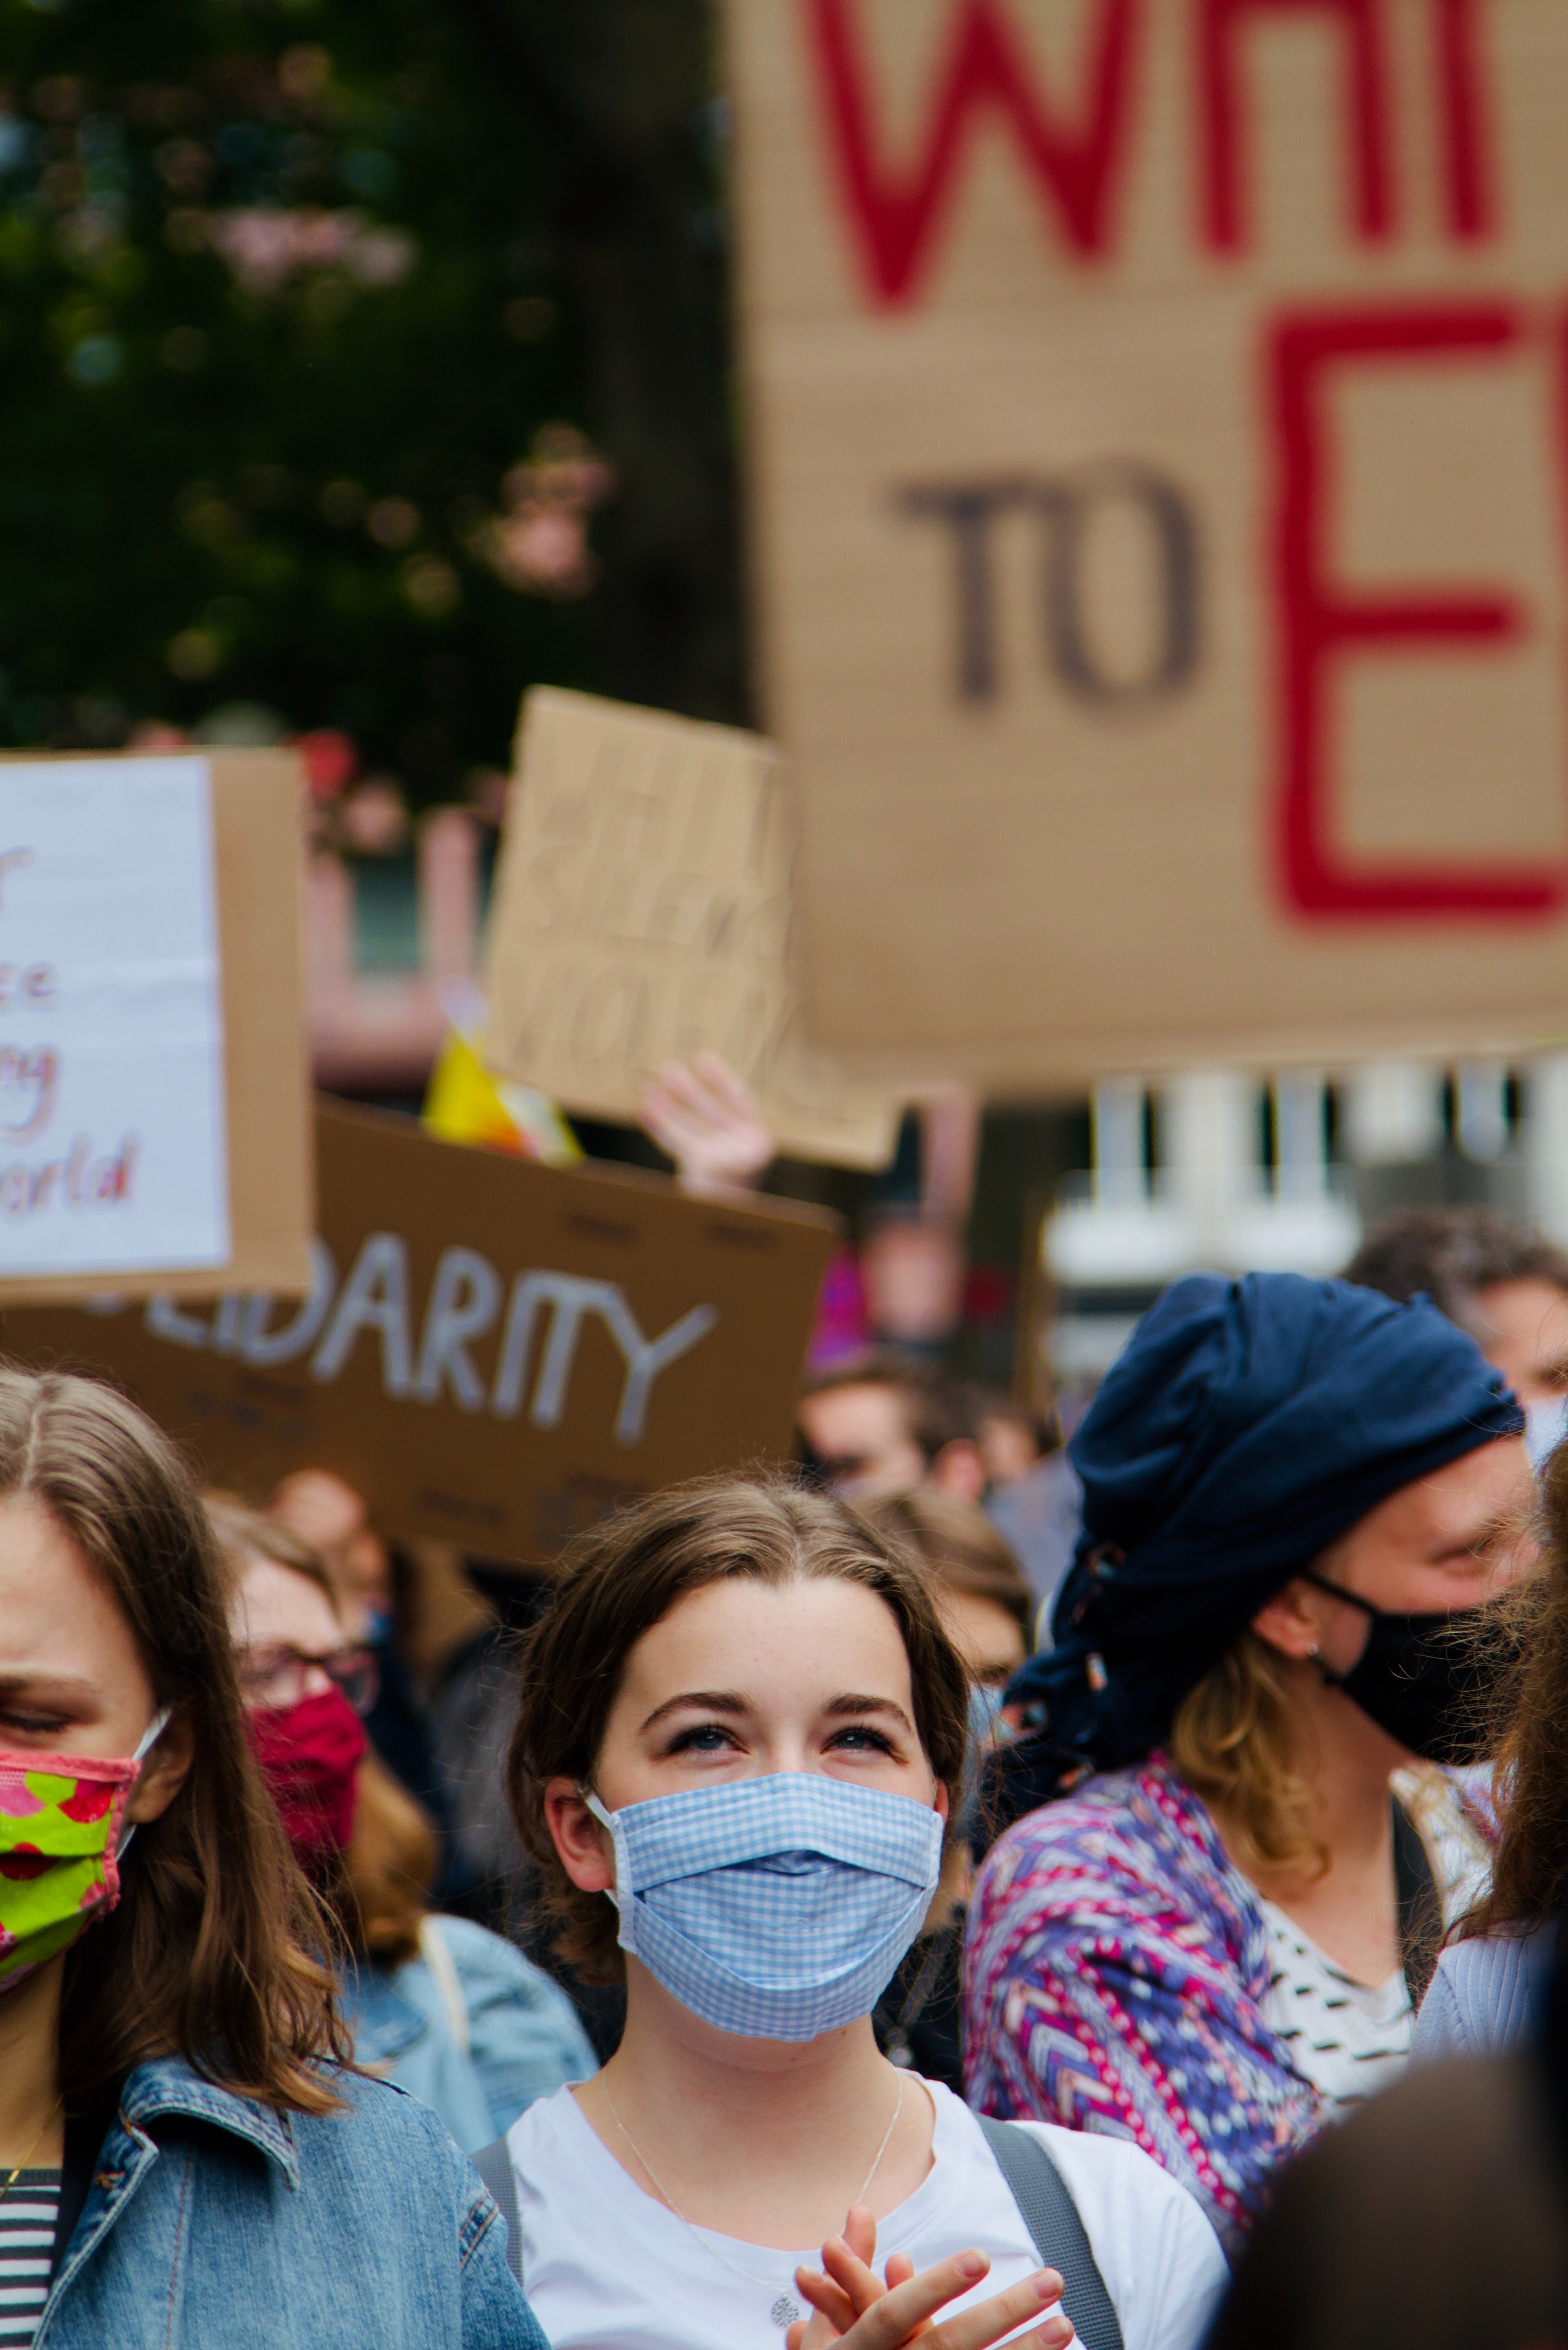 I was annoyed by the girl leading the protest | Photo: Unsplash